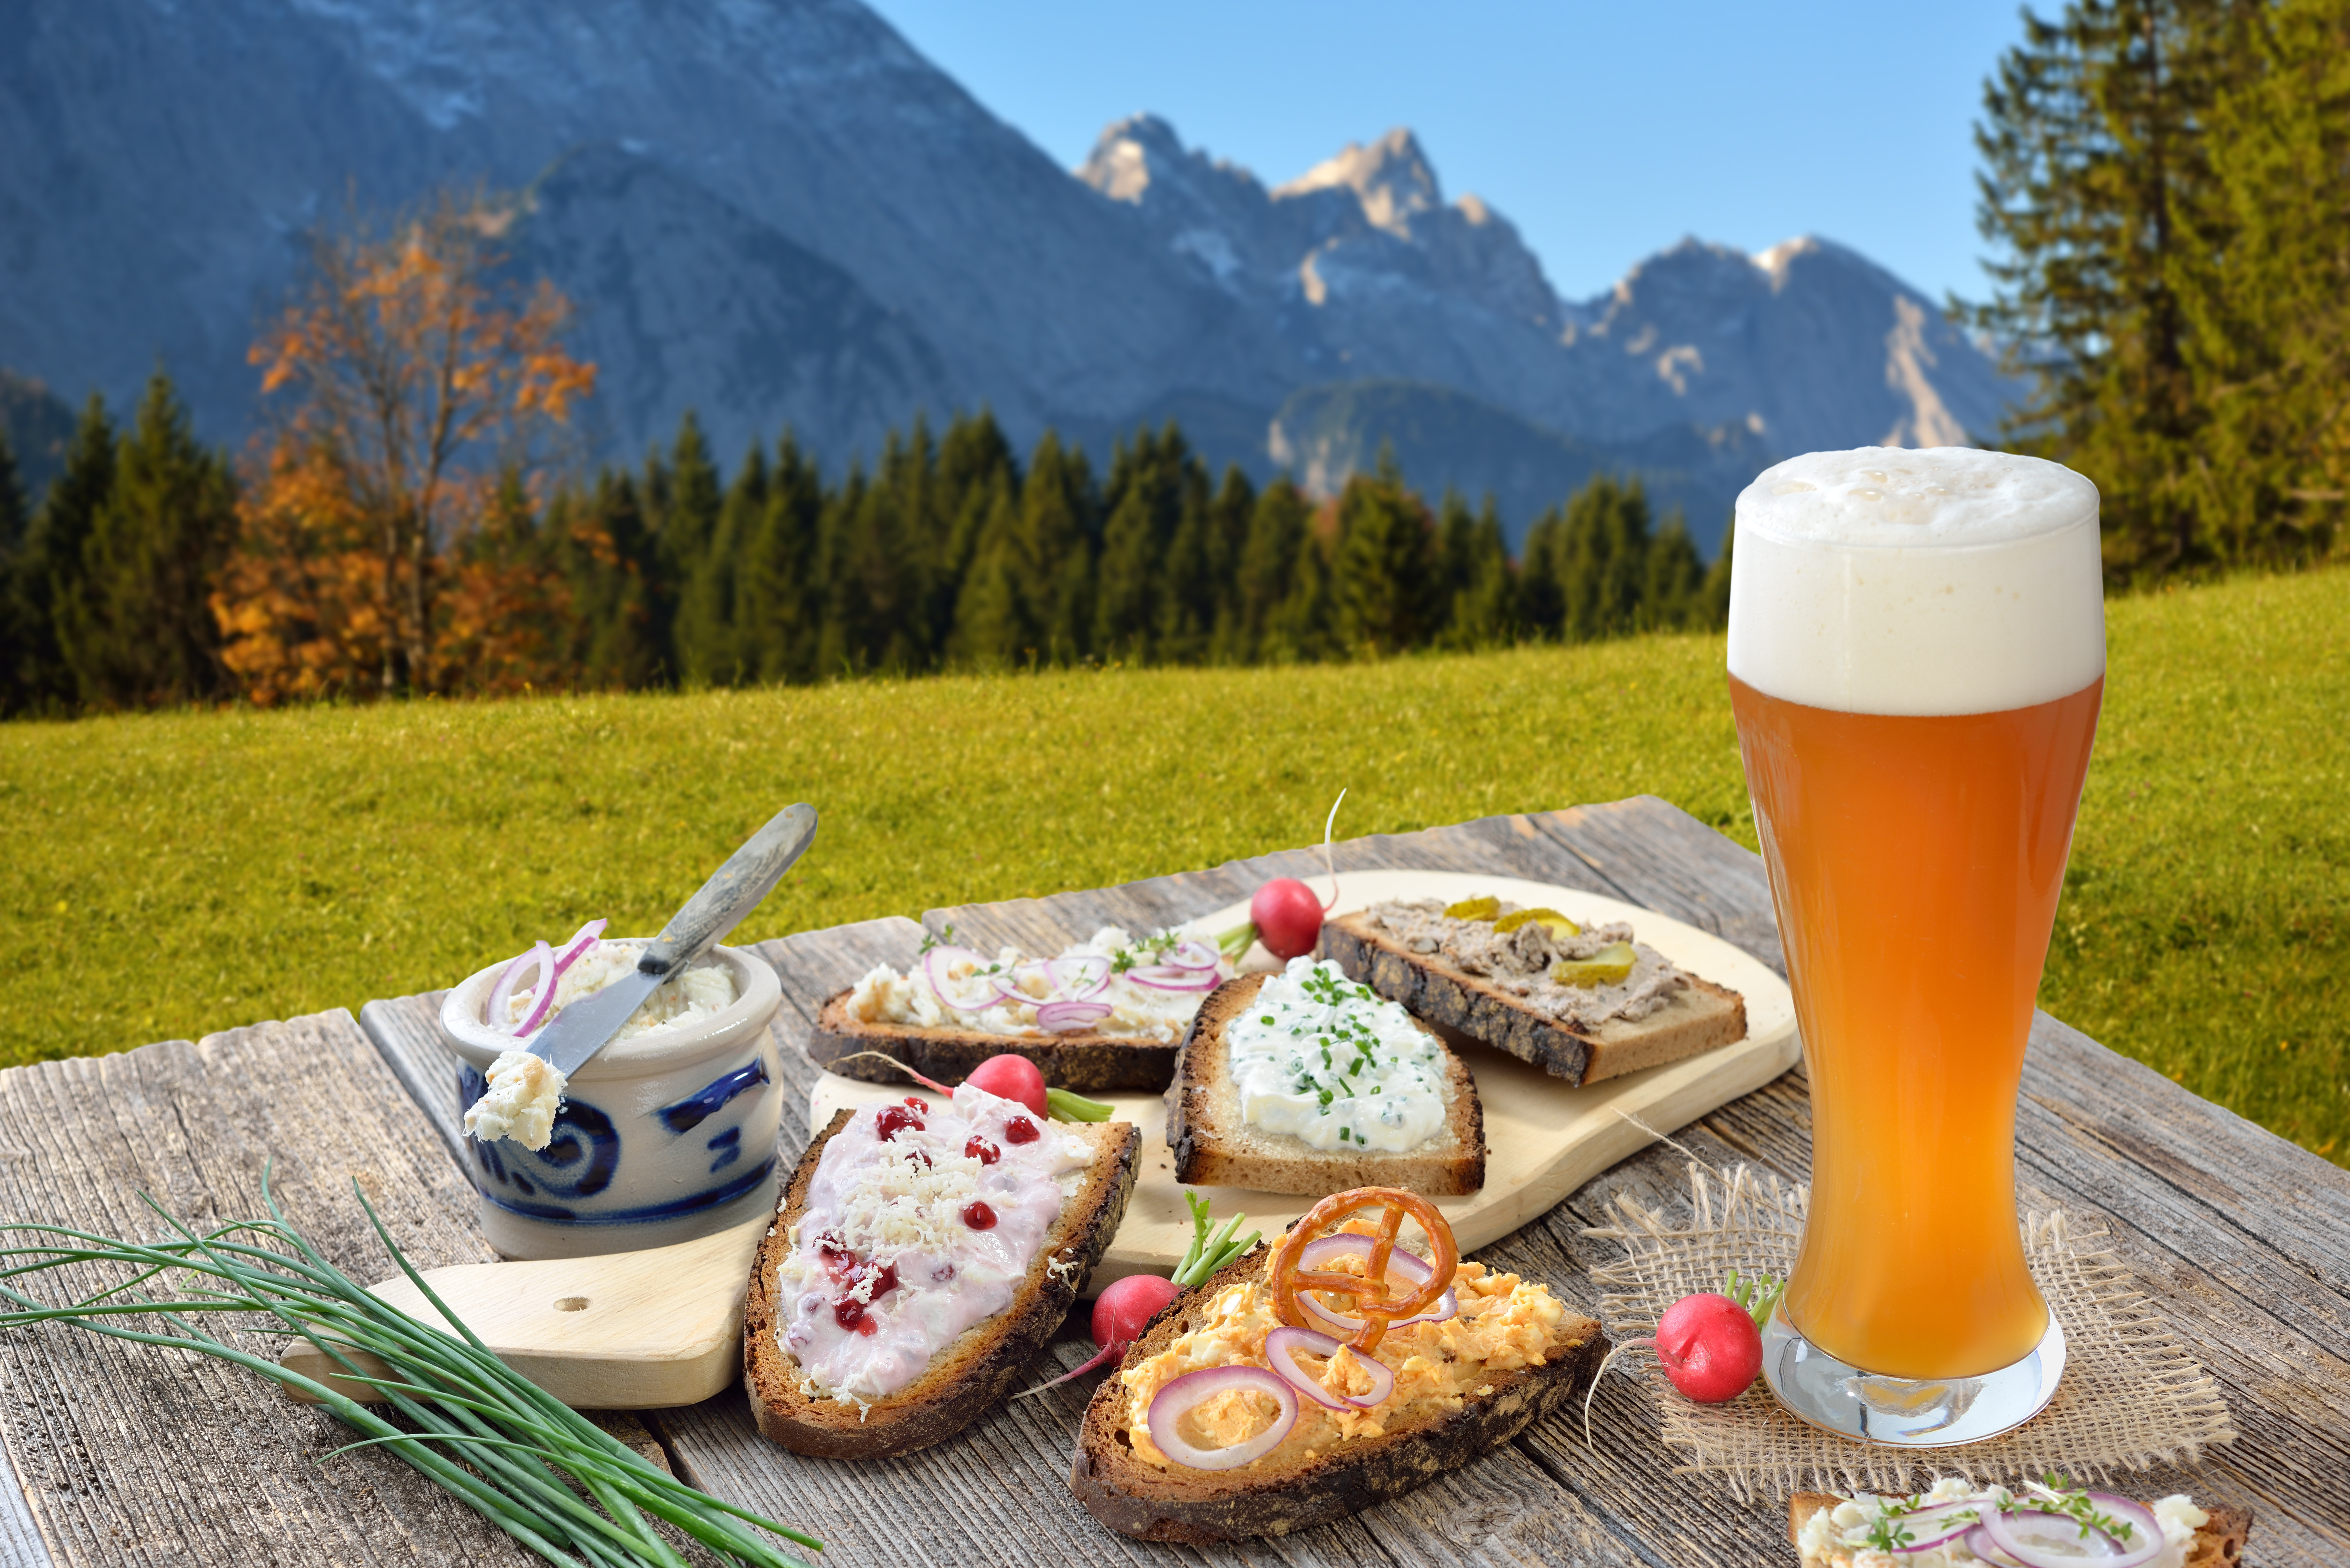 Hearty snack with different kinds of spreads on farmhouse bread served with a fresh yeast wheat beer on an old wooden table in the Bavarian Alps